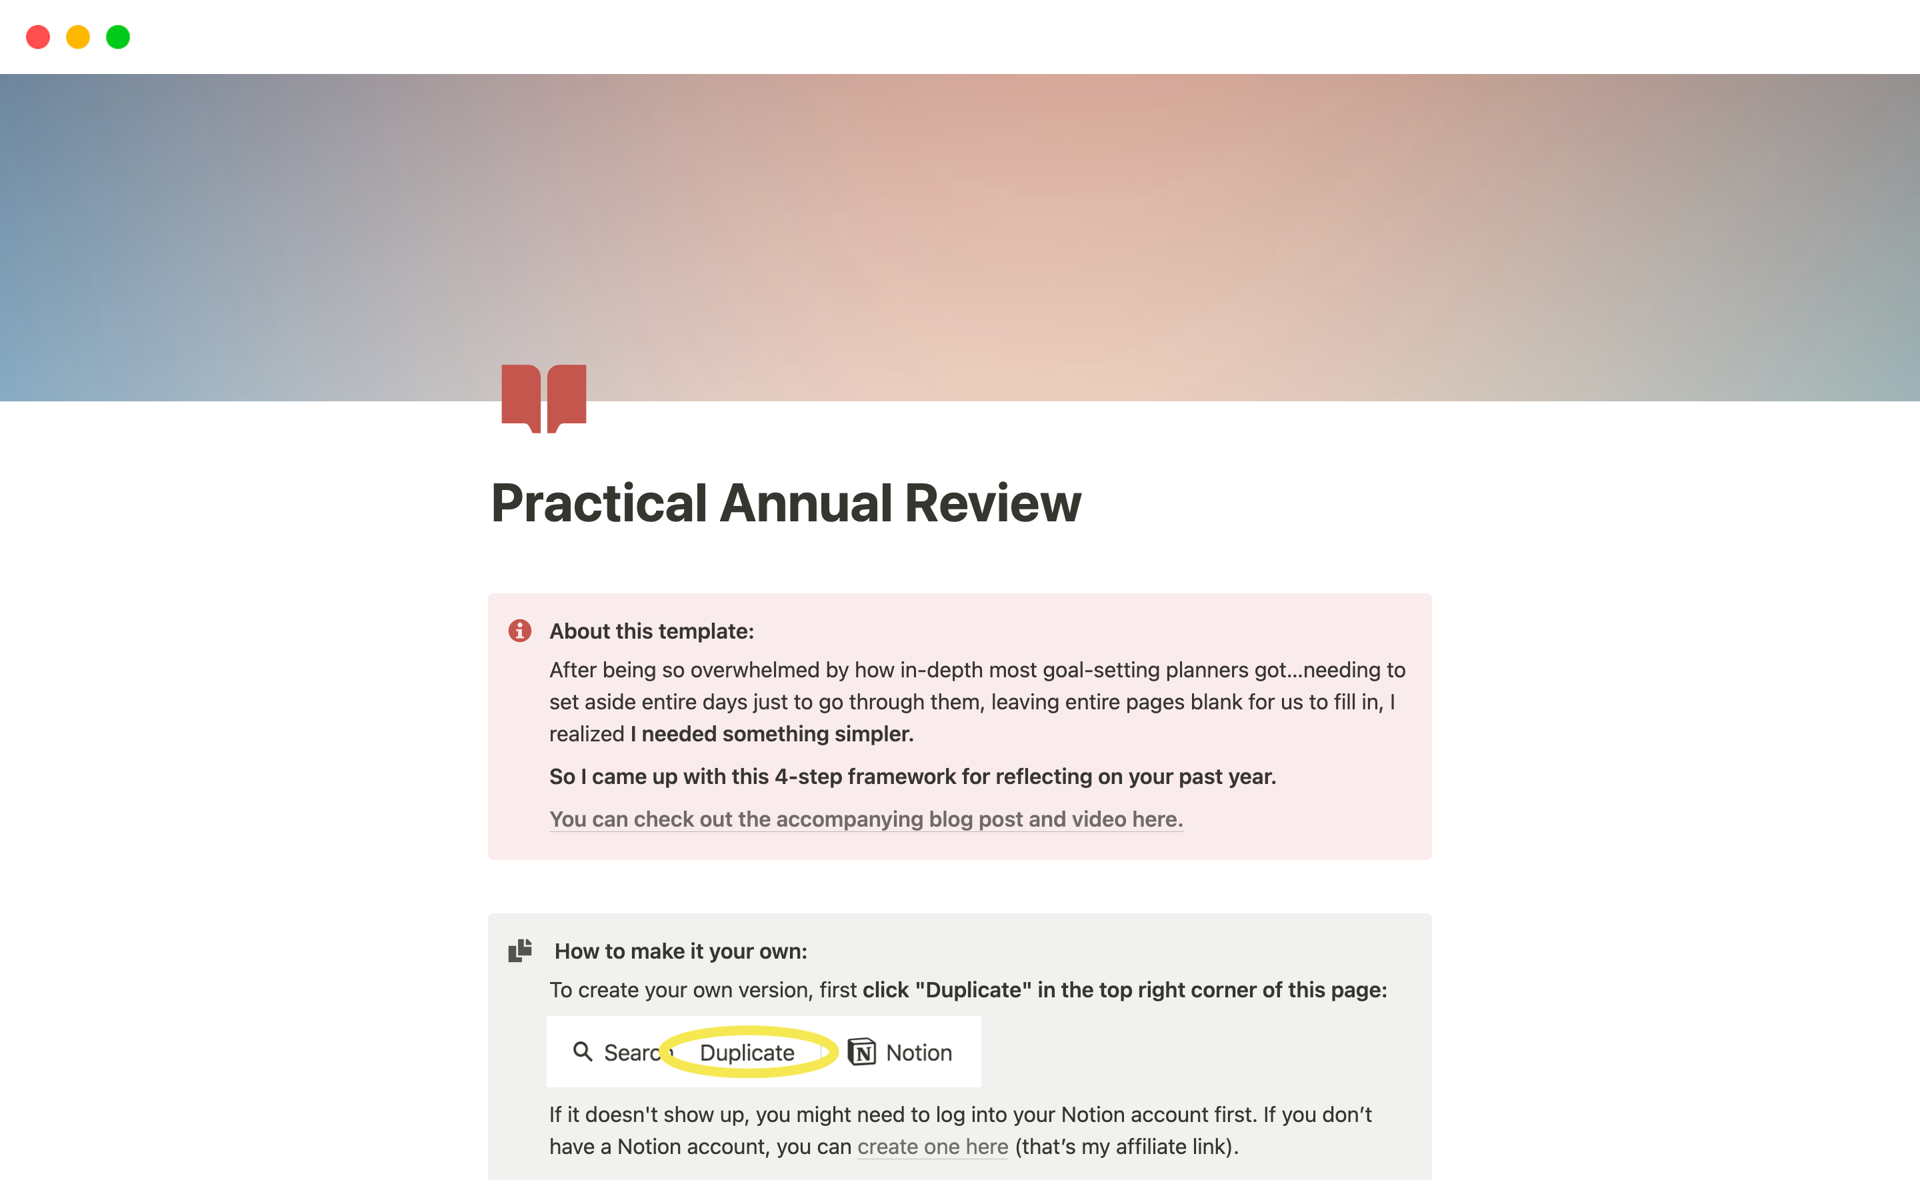 This template guides you through a simple 4-step annual review to look back on the past year and prepare for the next